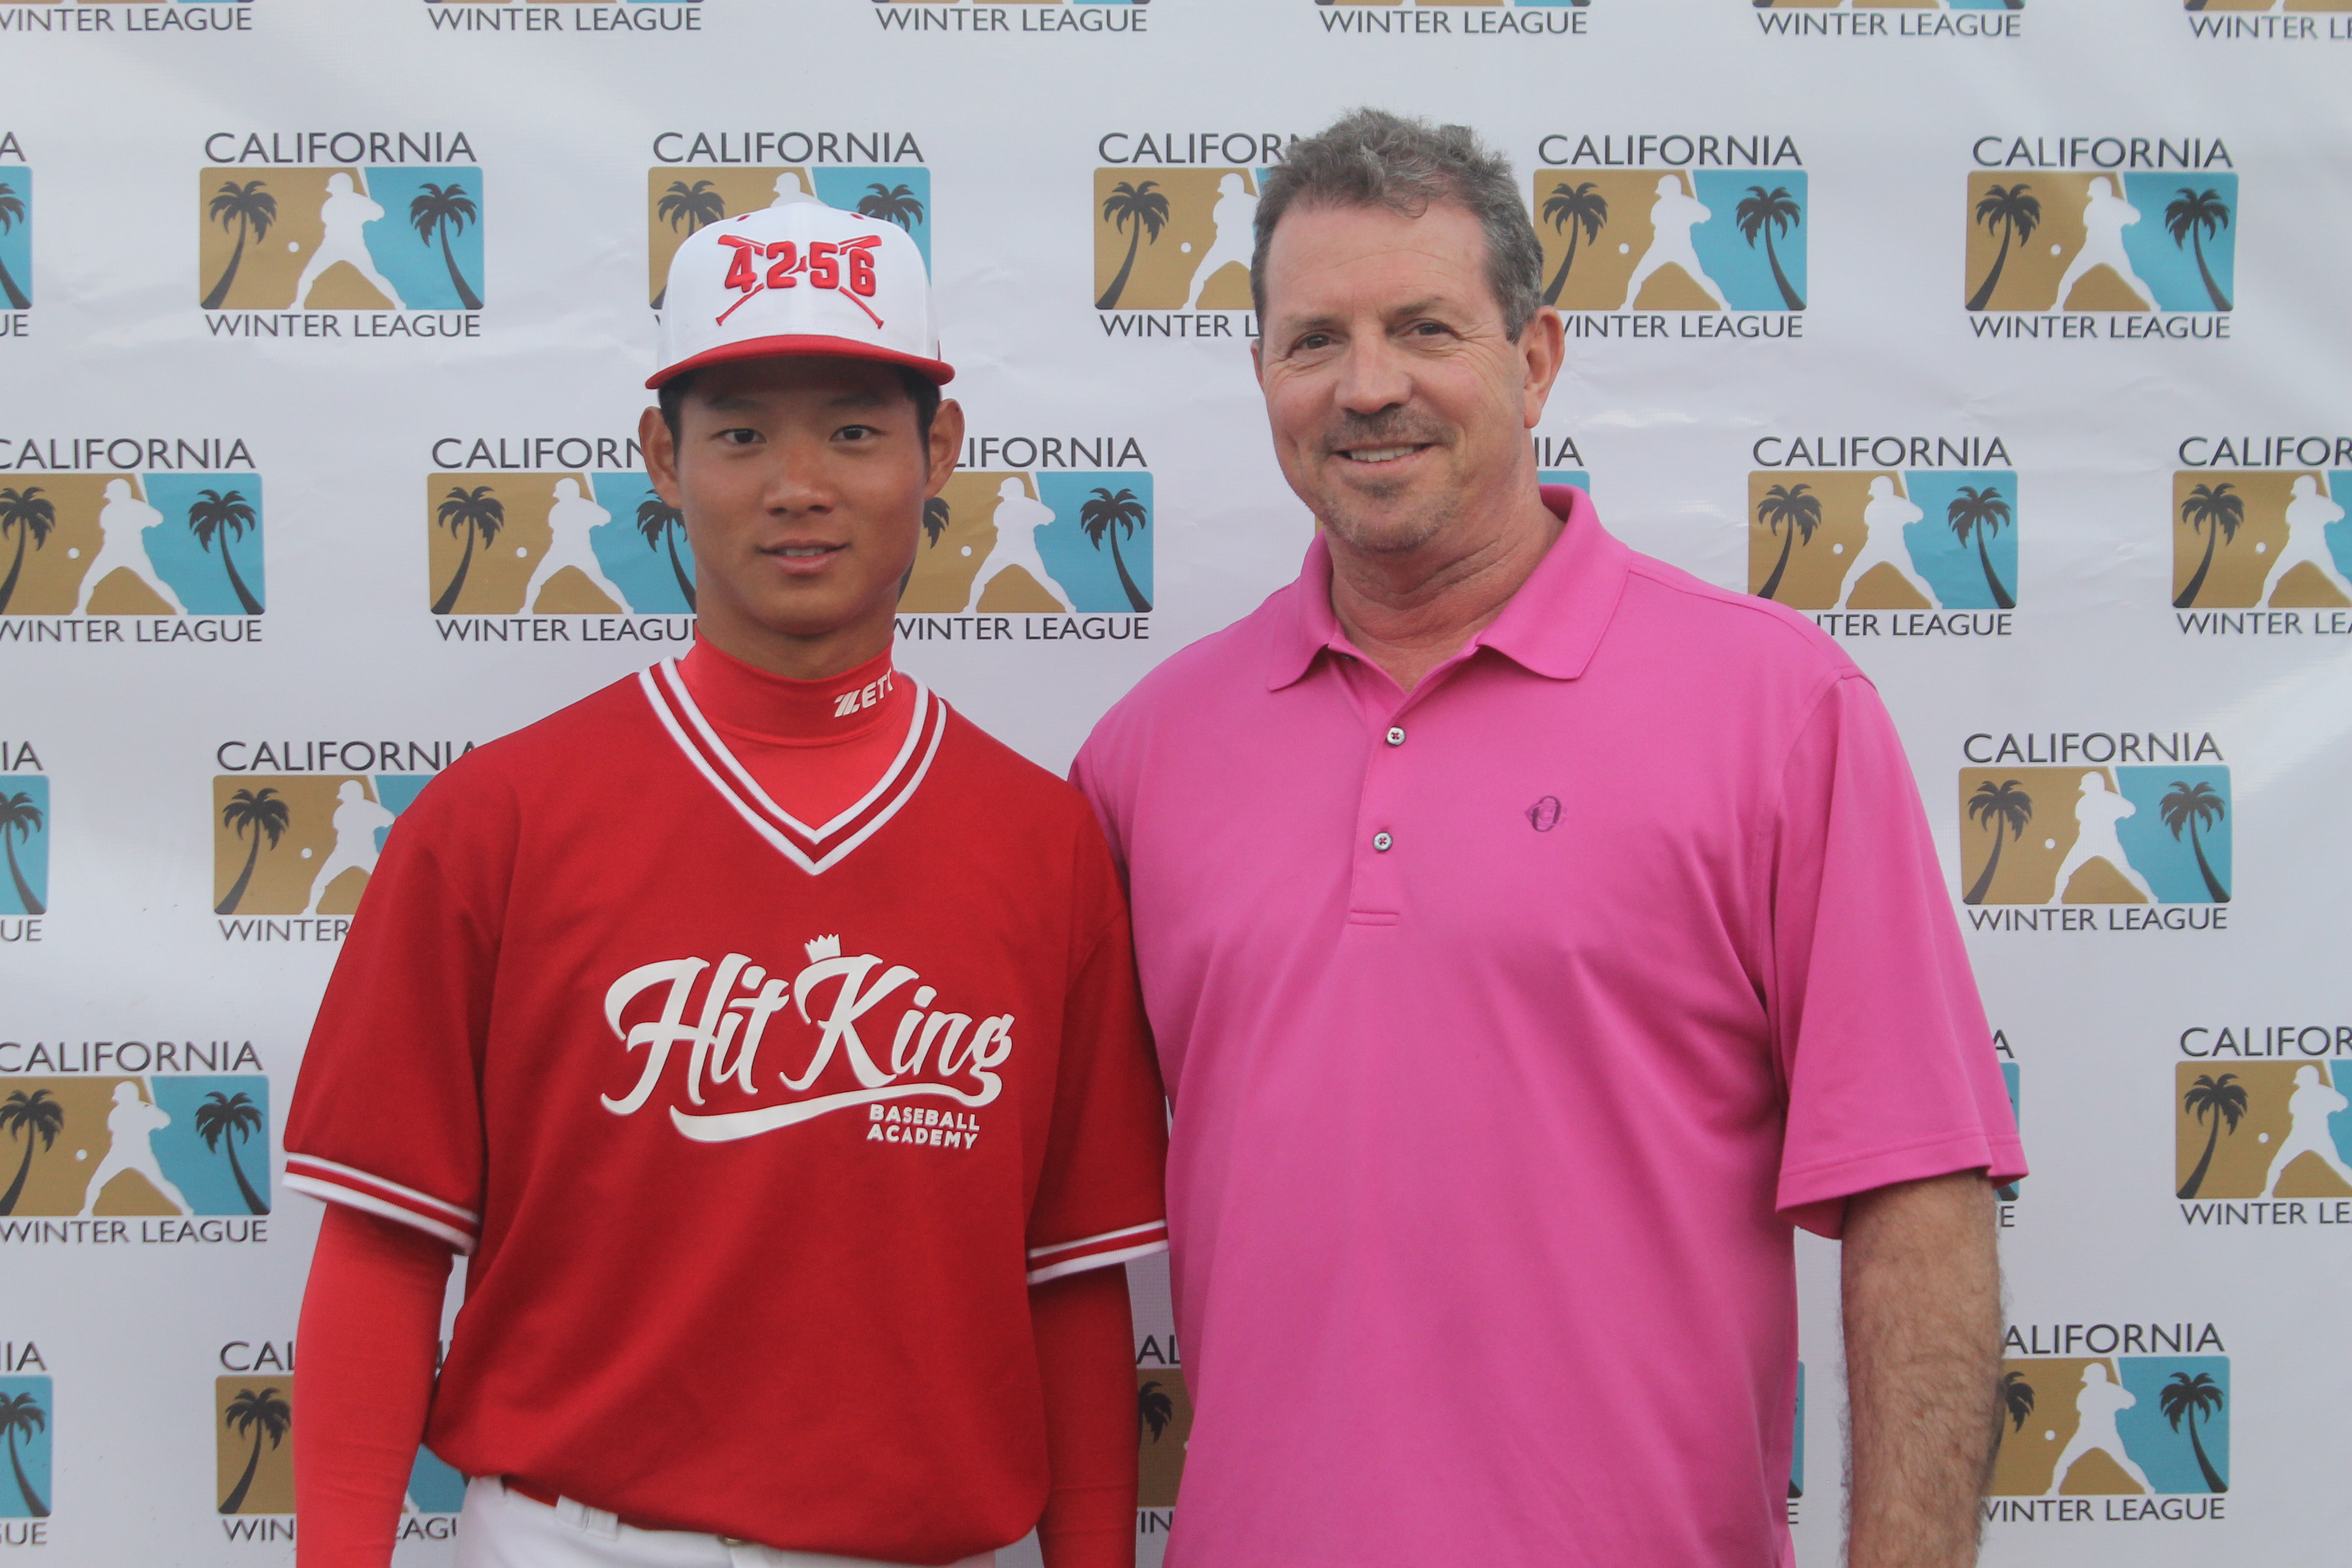 2017 CWL Shortstop, Shao-Pin Ho, Signs Contract With Marlins